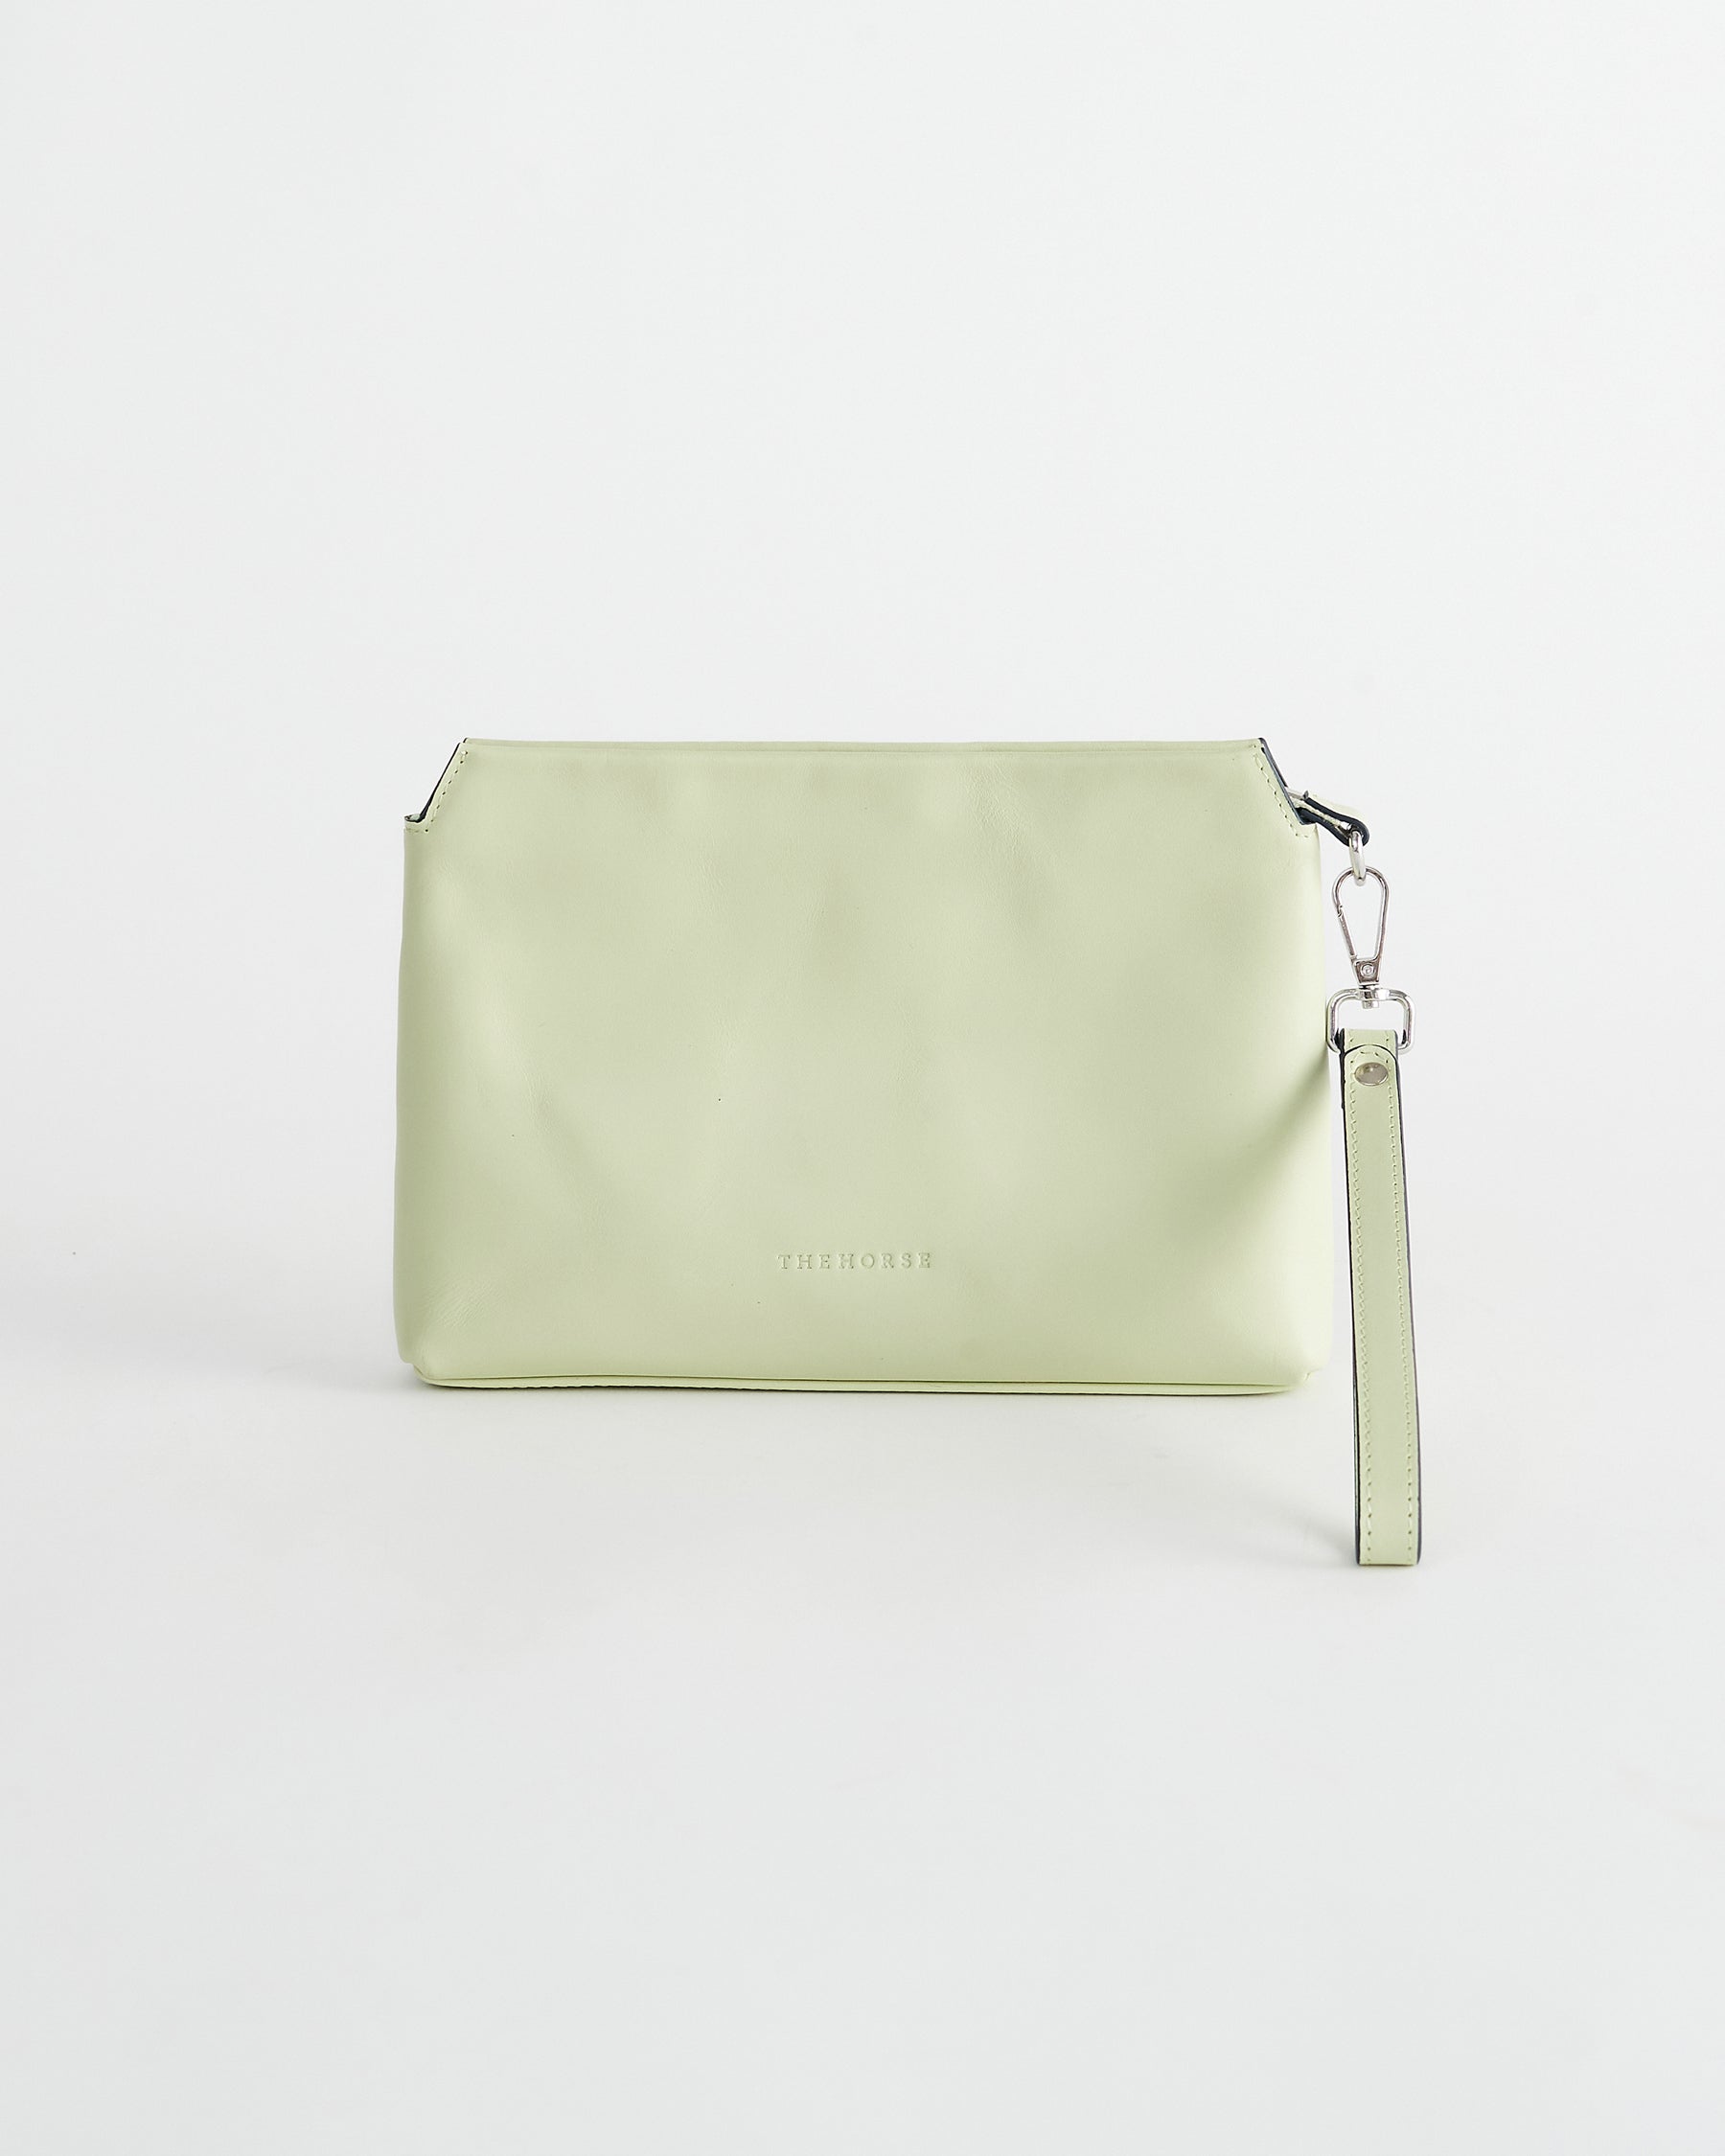 The Lola Smooth Leather Clutch in Pistachio by The Horse®